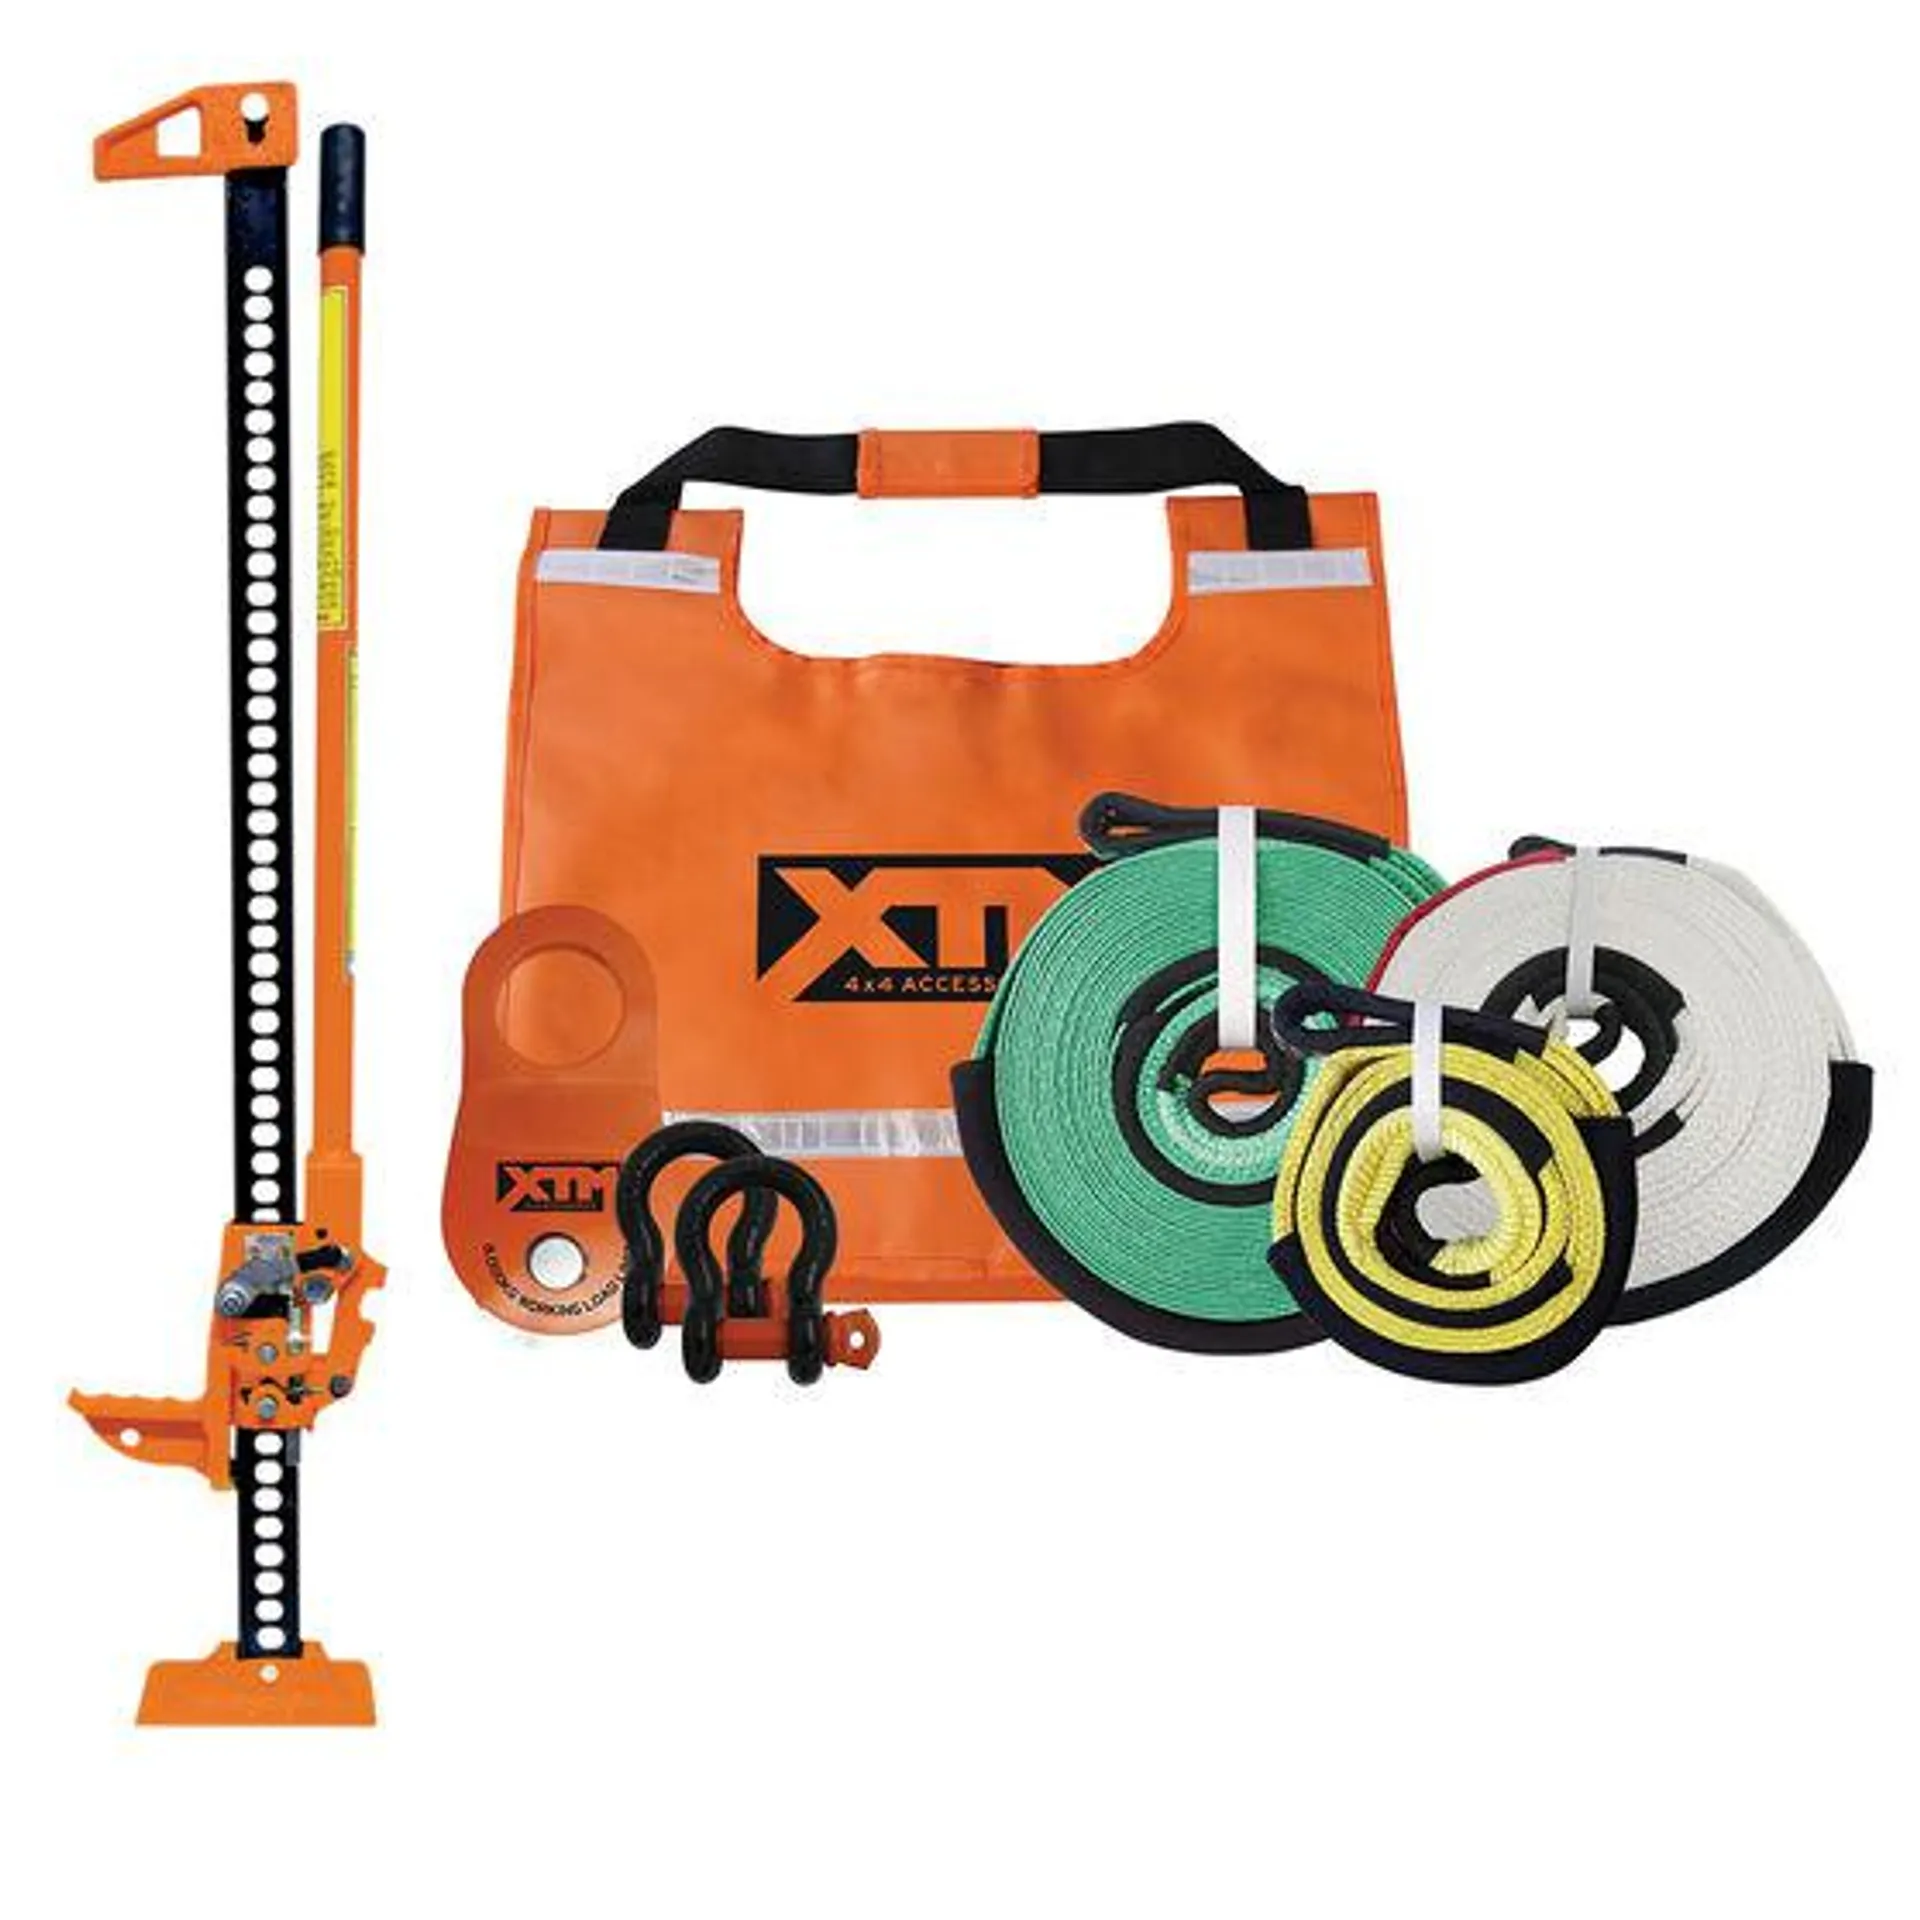 XTM Recovery Kit with High Lift Jack Set